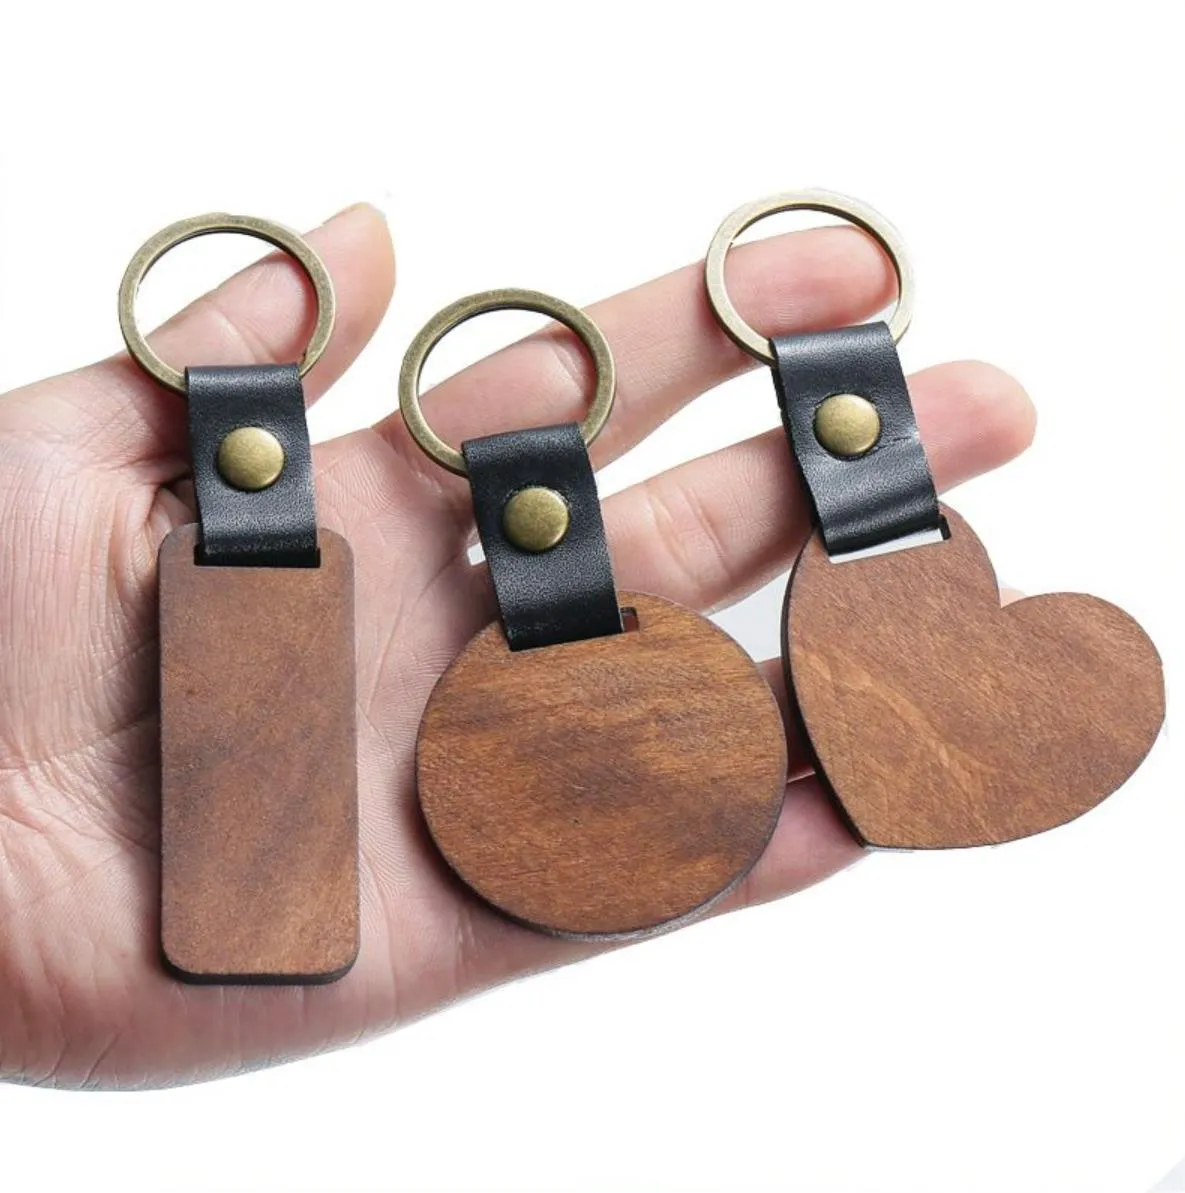 DIY Wooden Keychain Pendant Party Favor Heart Shaped Leather Keychains Bronze Keyring XMAS Gifts Key Chain Wholesale